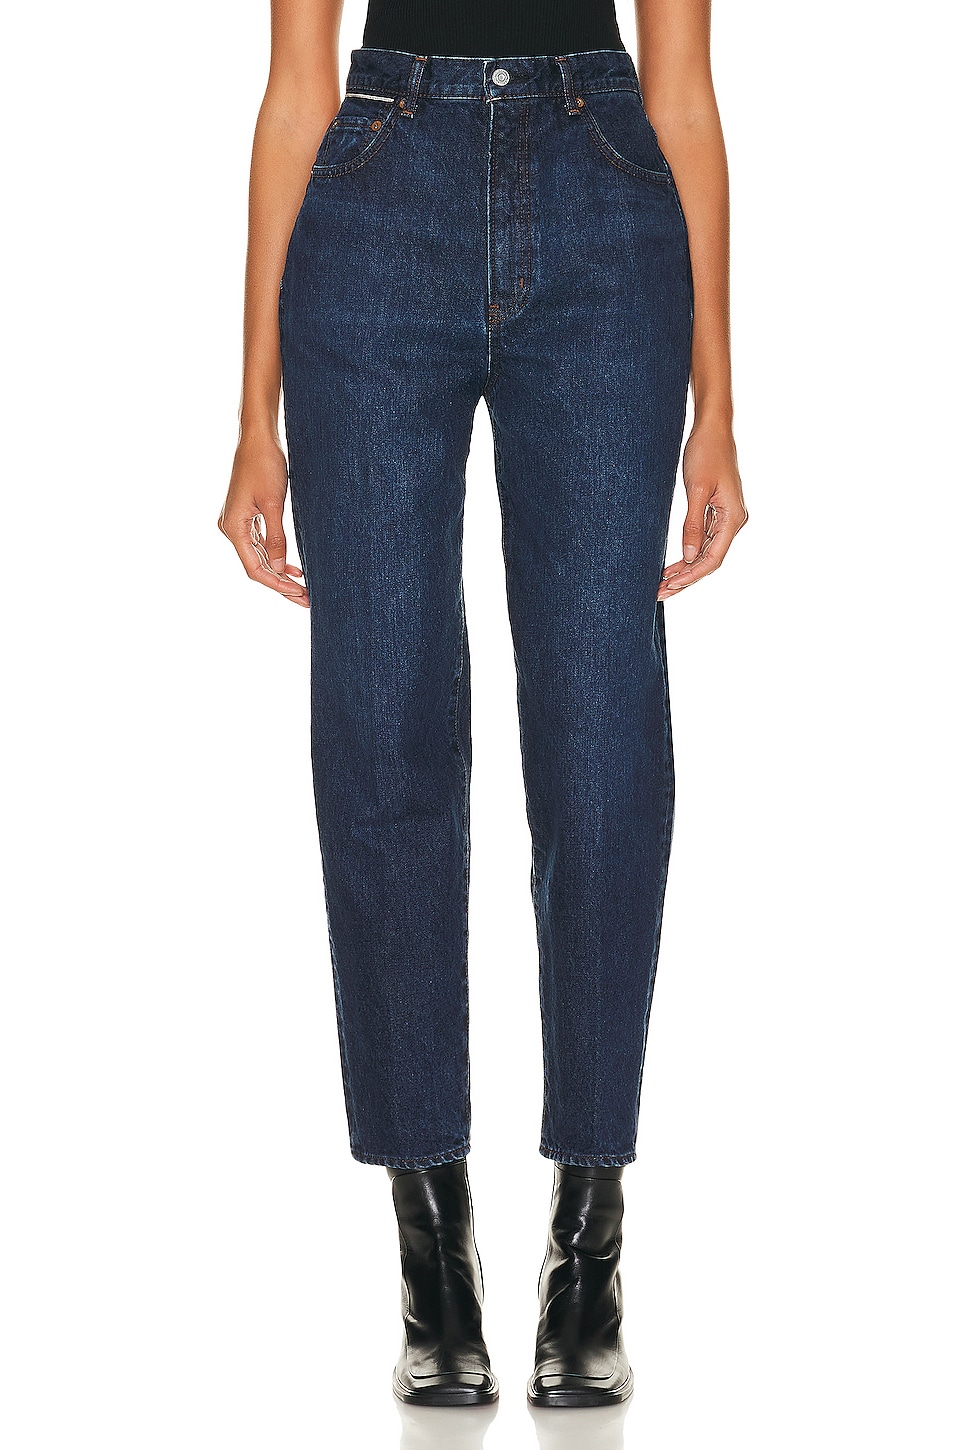 Moussy Vintage Toolville Carrot Pant in Dark Blue | FWRD